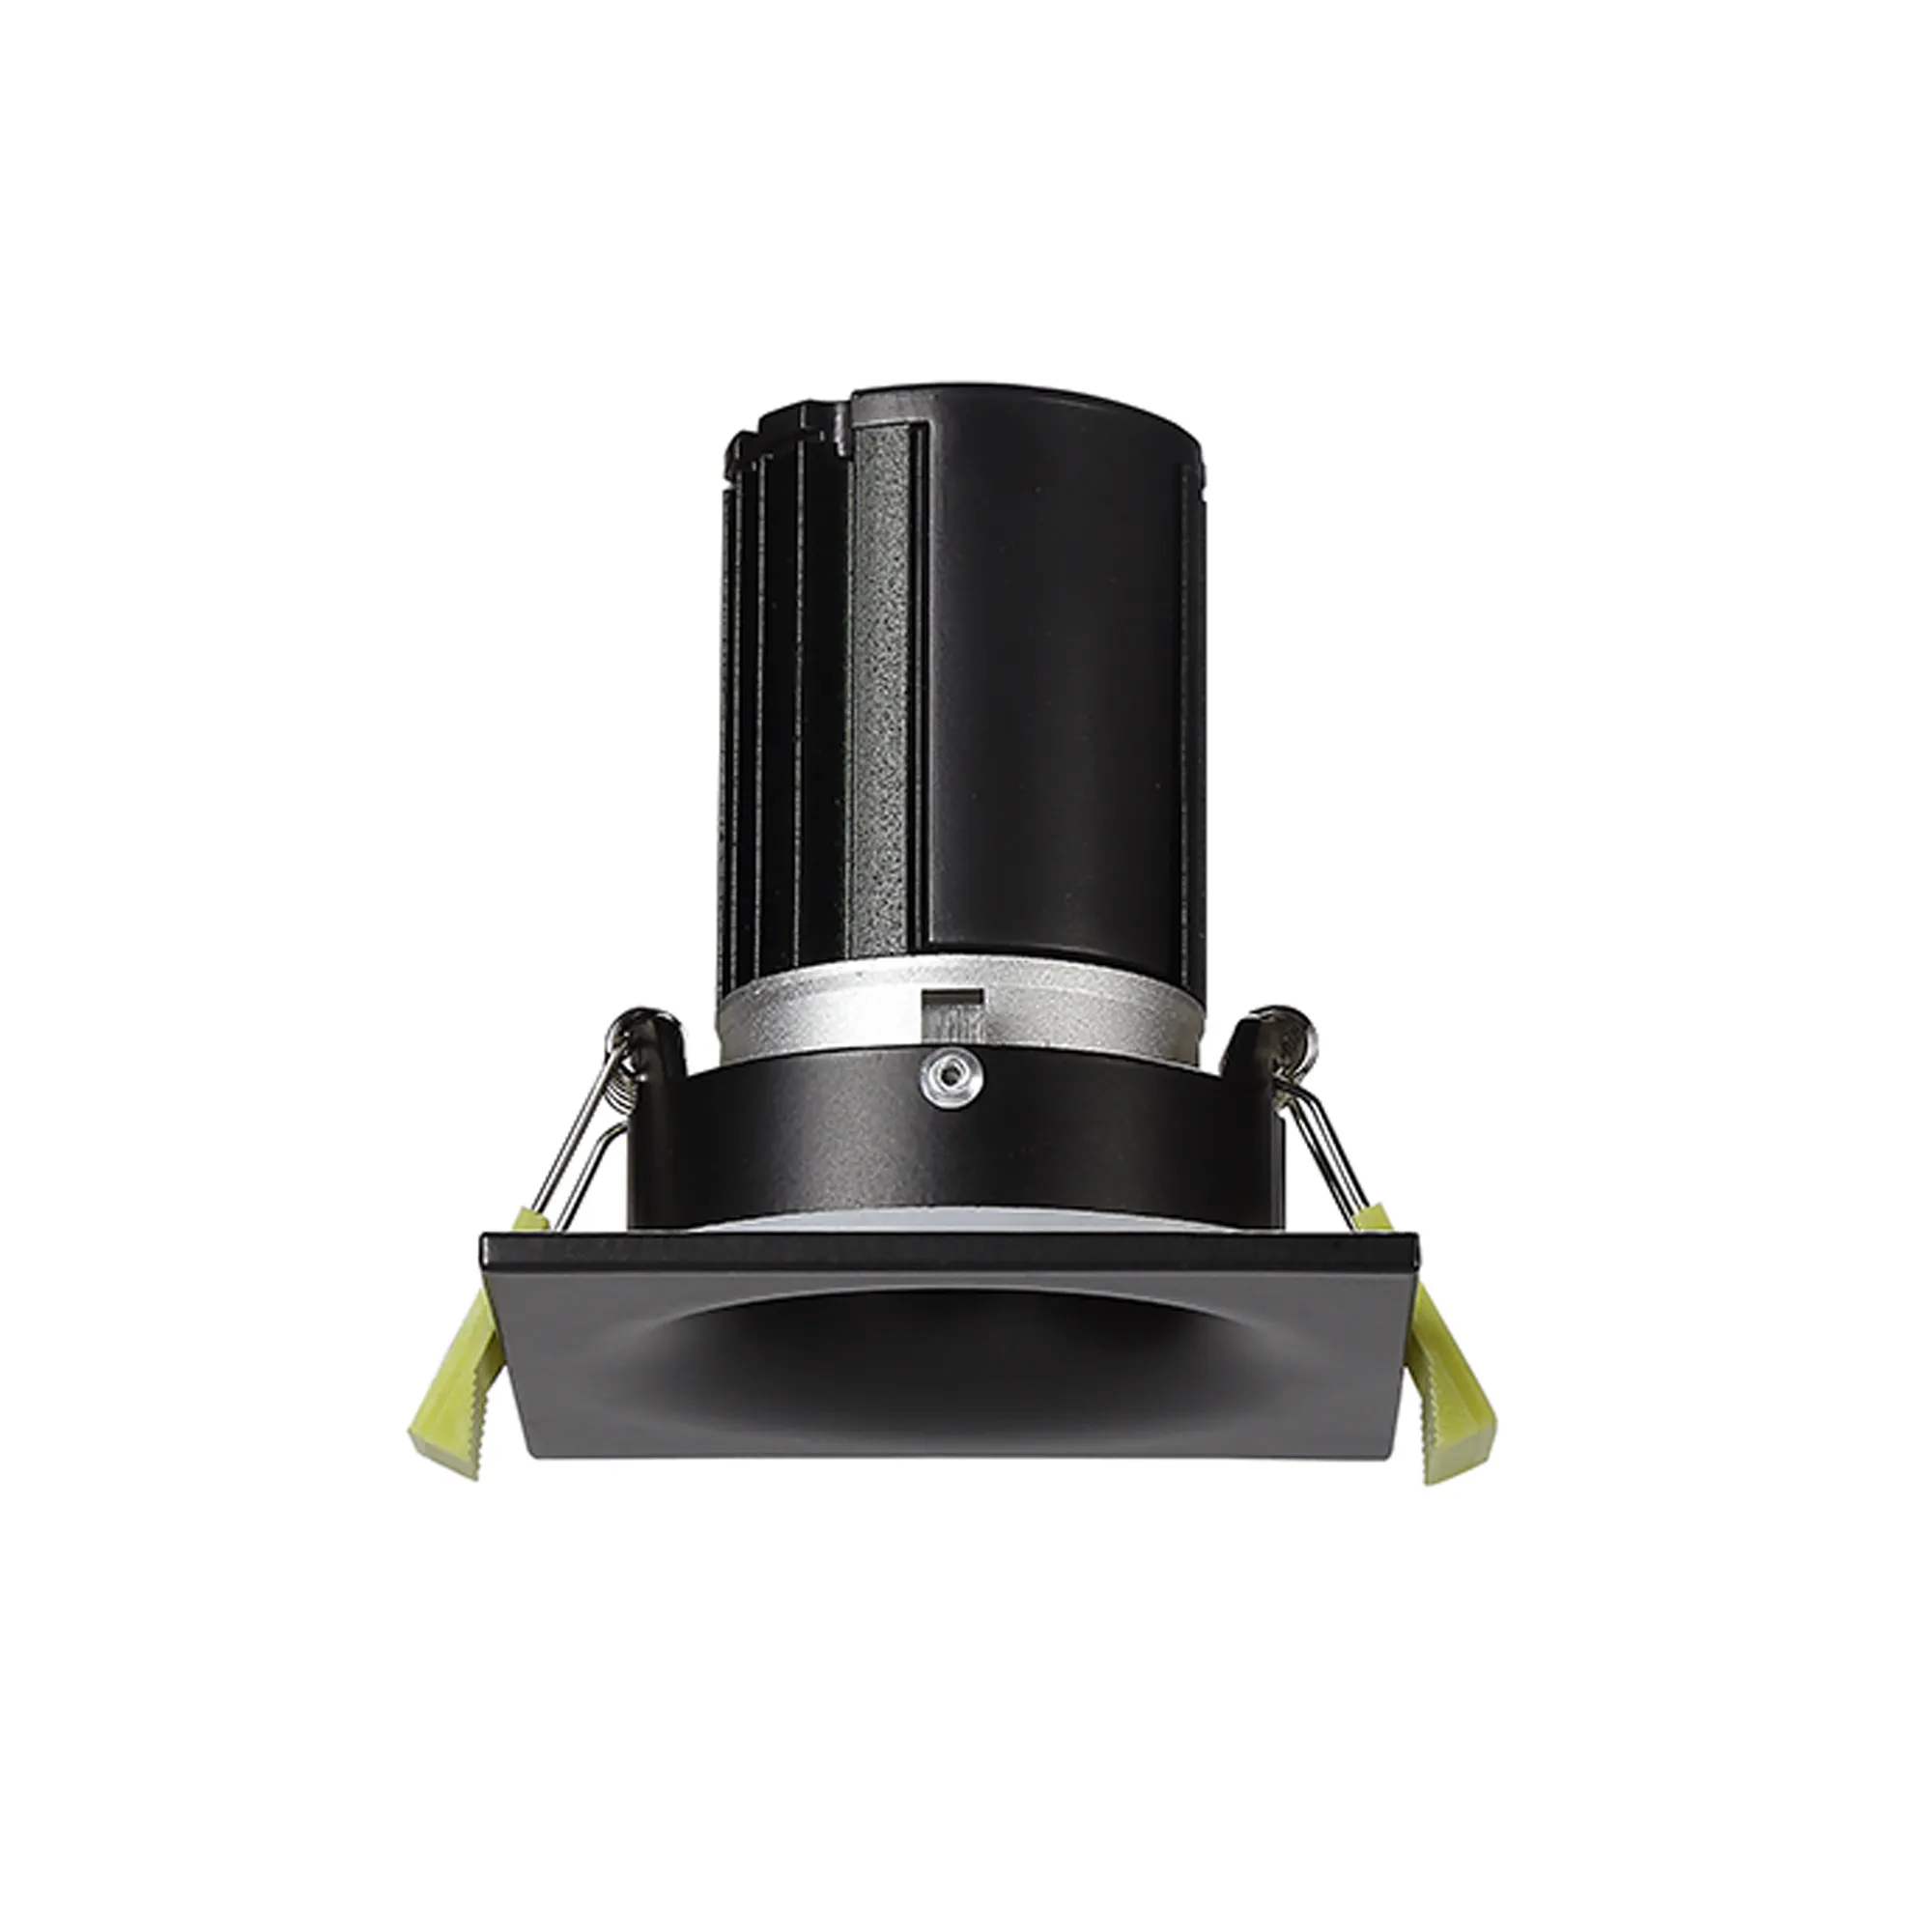 DM202500  Bruve 12 Tridonic powered 12W 3000K 1200lm 36° LED Engine;300mA ; CRI>90 LED Engine Matt Black Fixed Square Recessed Downlight; Inner Glass cover; IP65